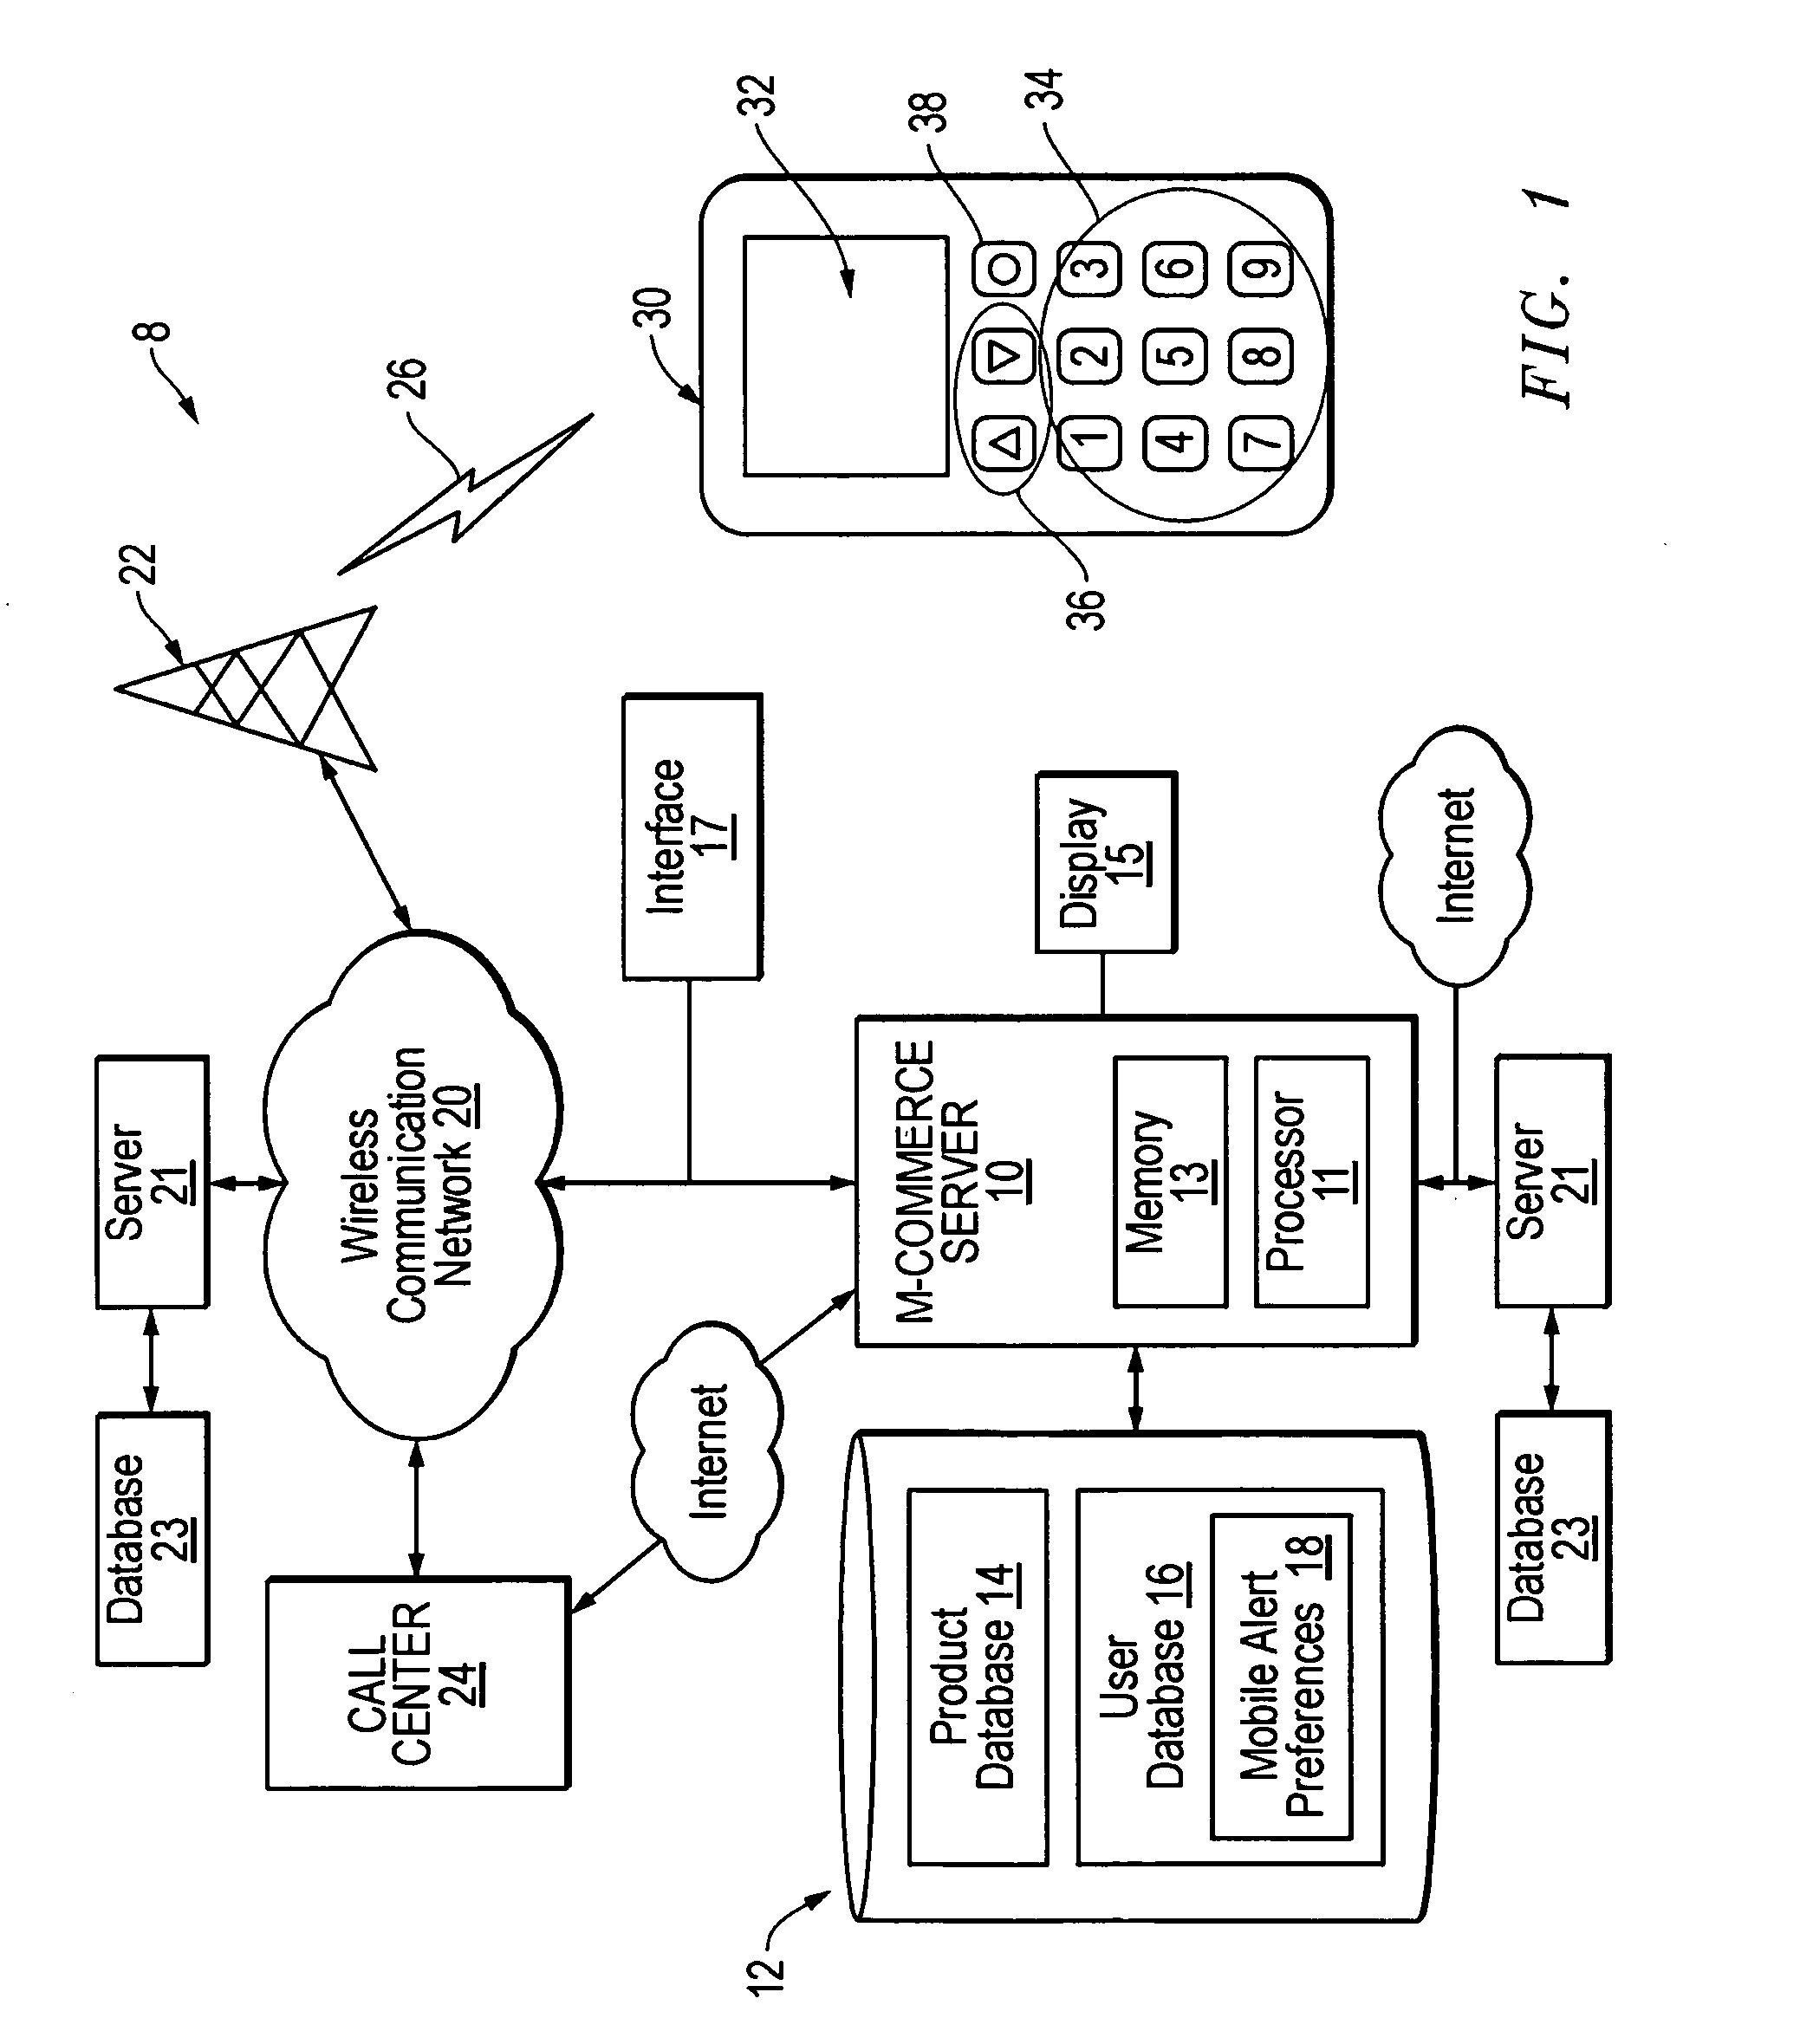 Method, system and program product for communicating e-commerce content over-the-air to mobile devices